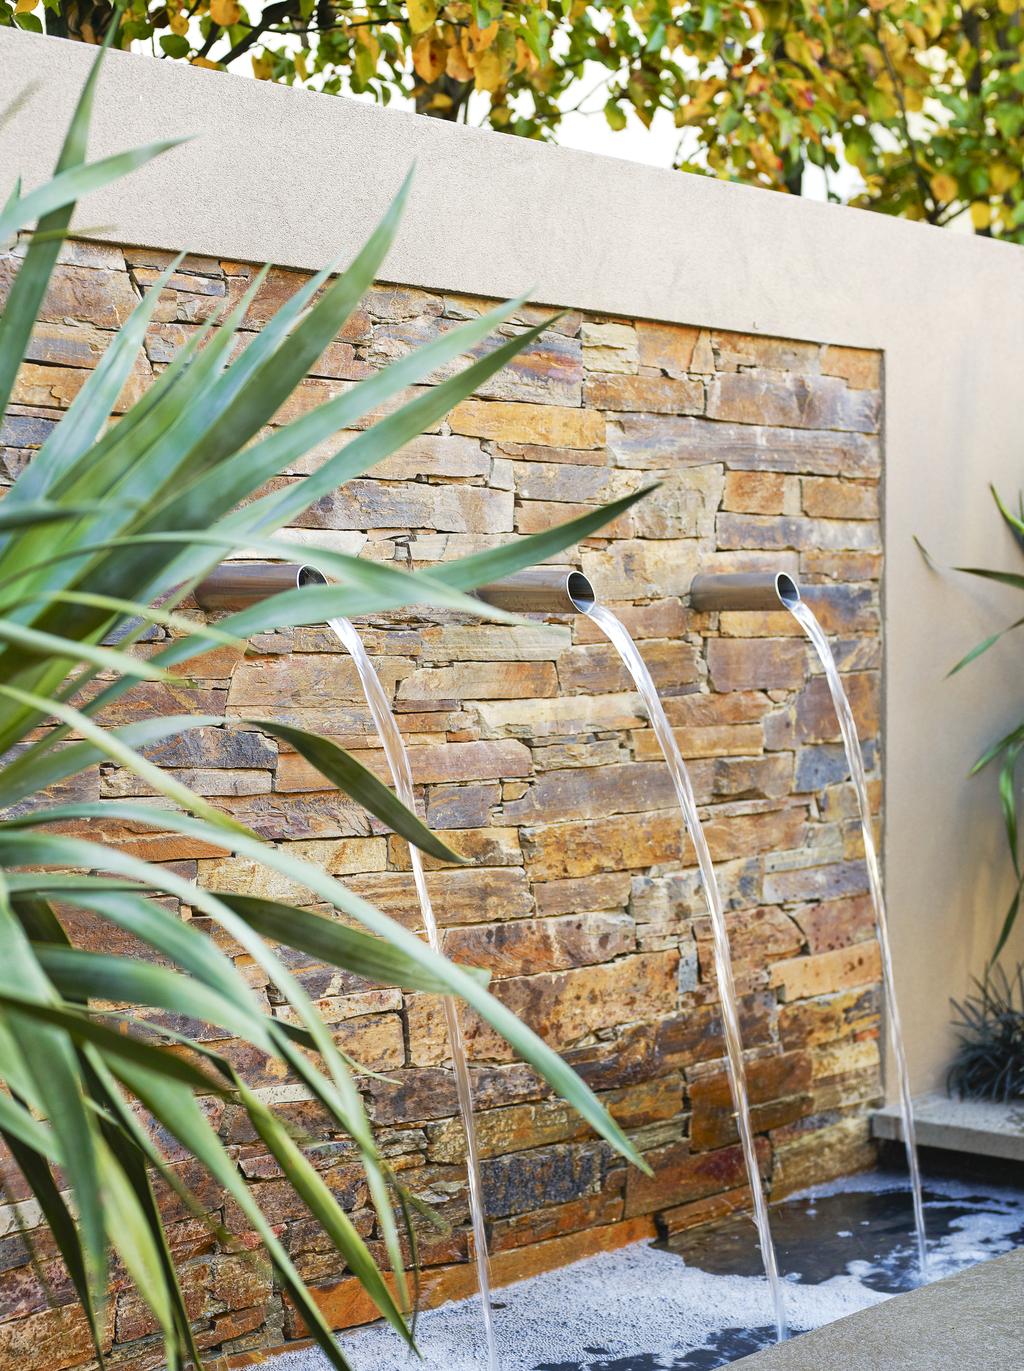 The fountain wall at the rear of the garden, clad in Badger Dry Stone walling from Eco Outdoor, is more than just a handy trick to hide the pool equipment.